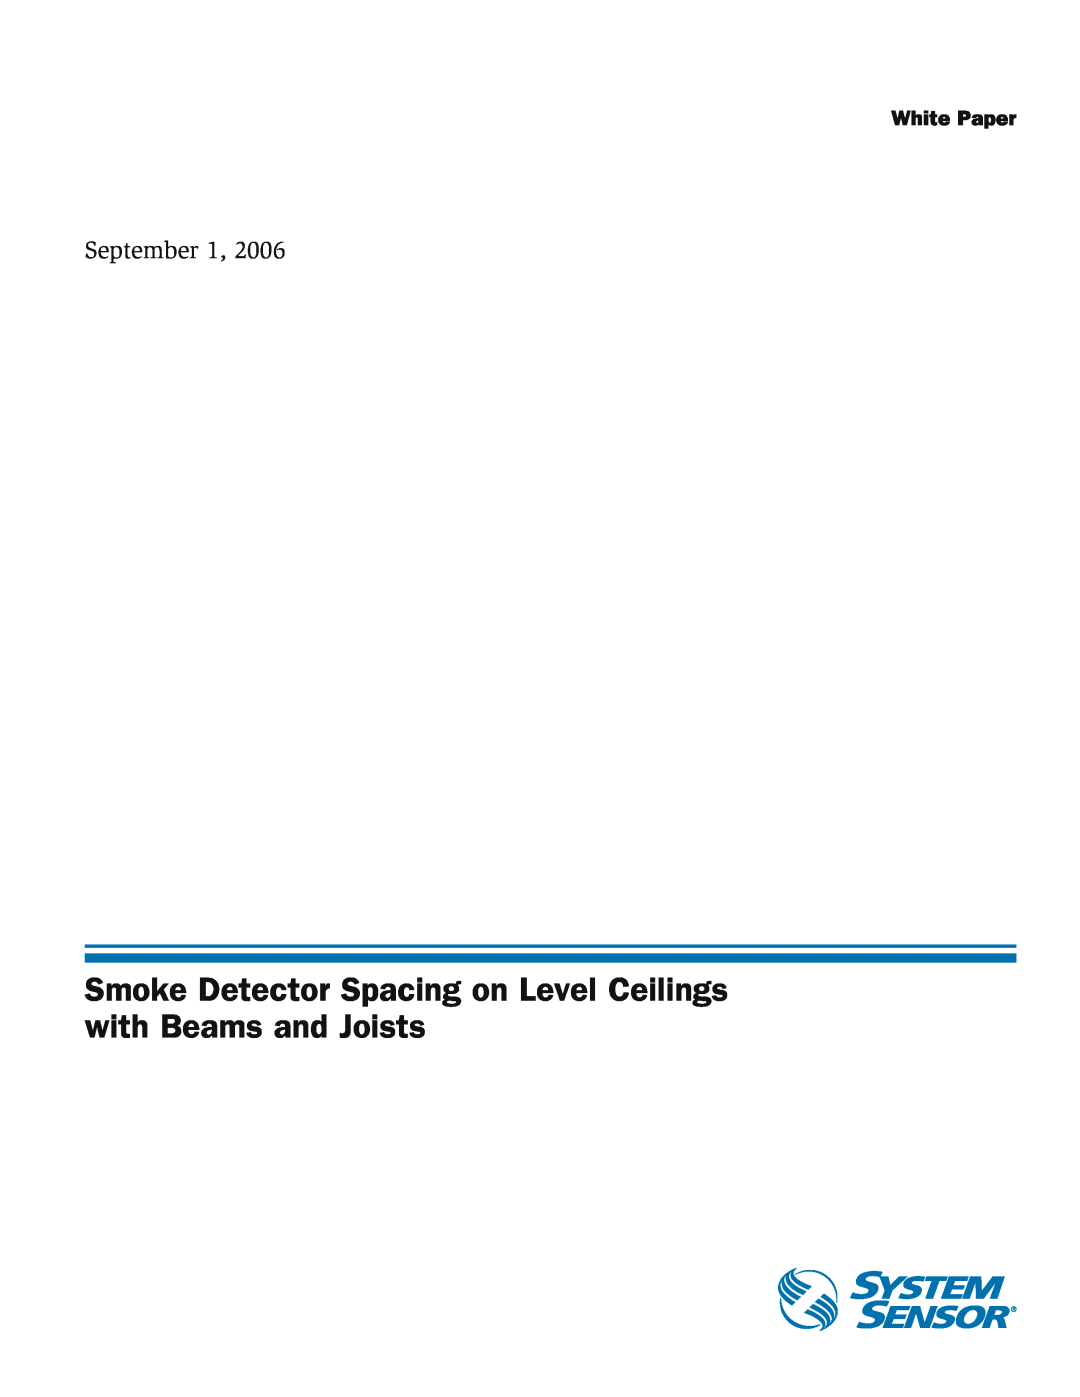 System Sensor Smoke Detector Spacing on Level Ceilings with Beams and Joists manual September, White Paper 